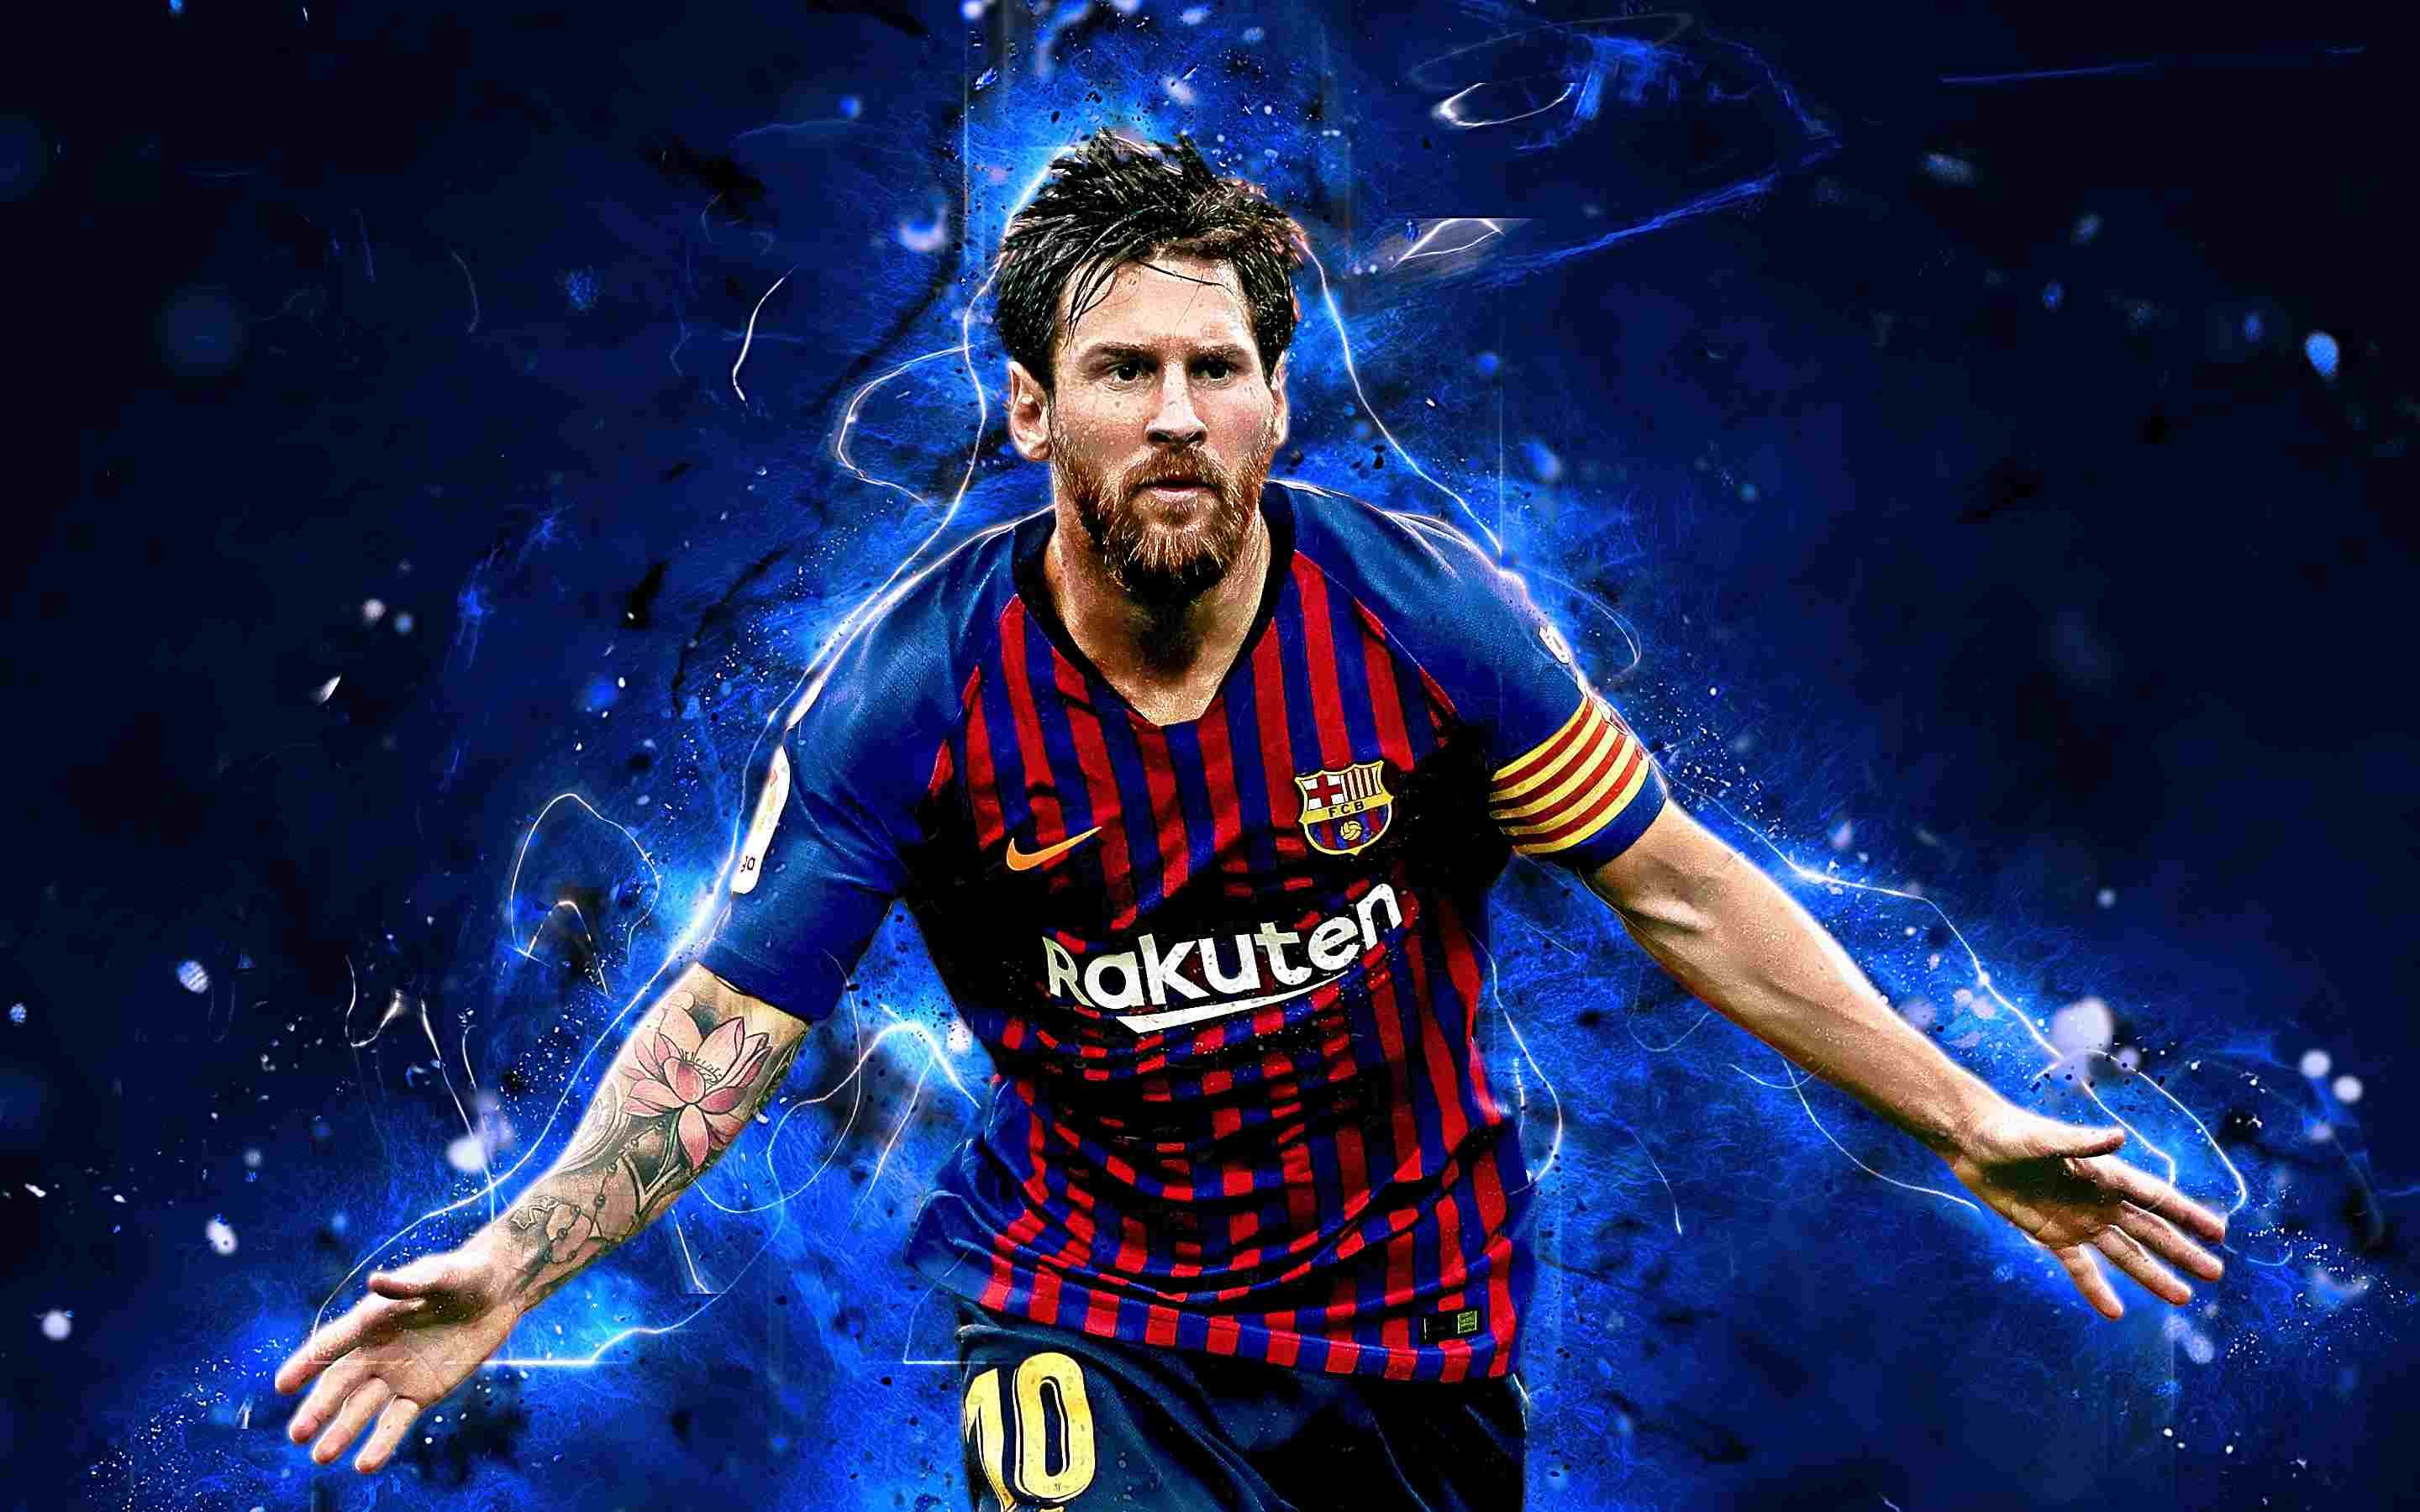 Messi 4k Ultra Hd Wallpapers Top Messi 4k Ultra Hd Otosection 2880x1800